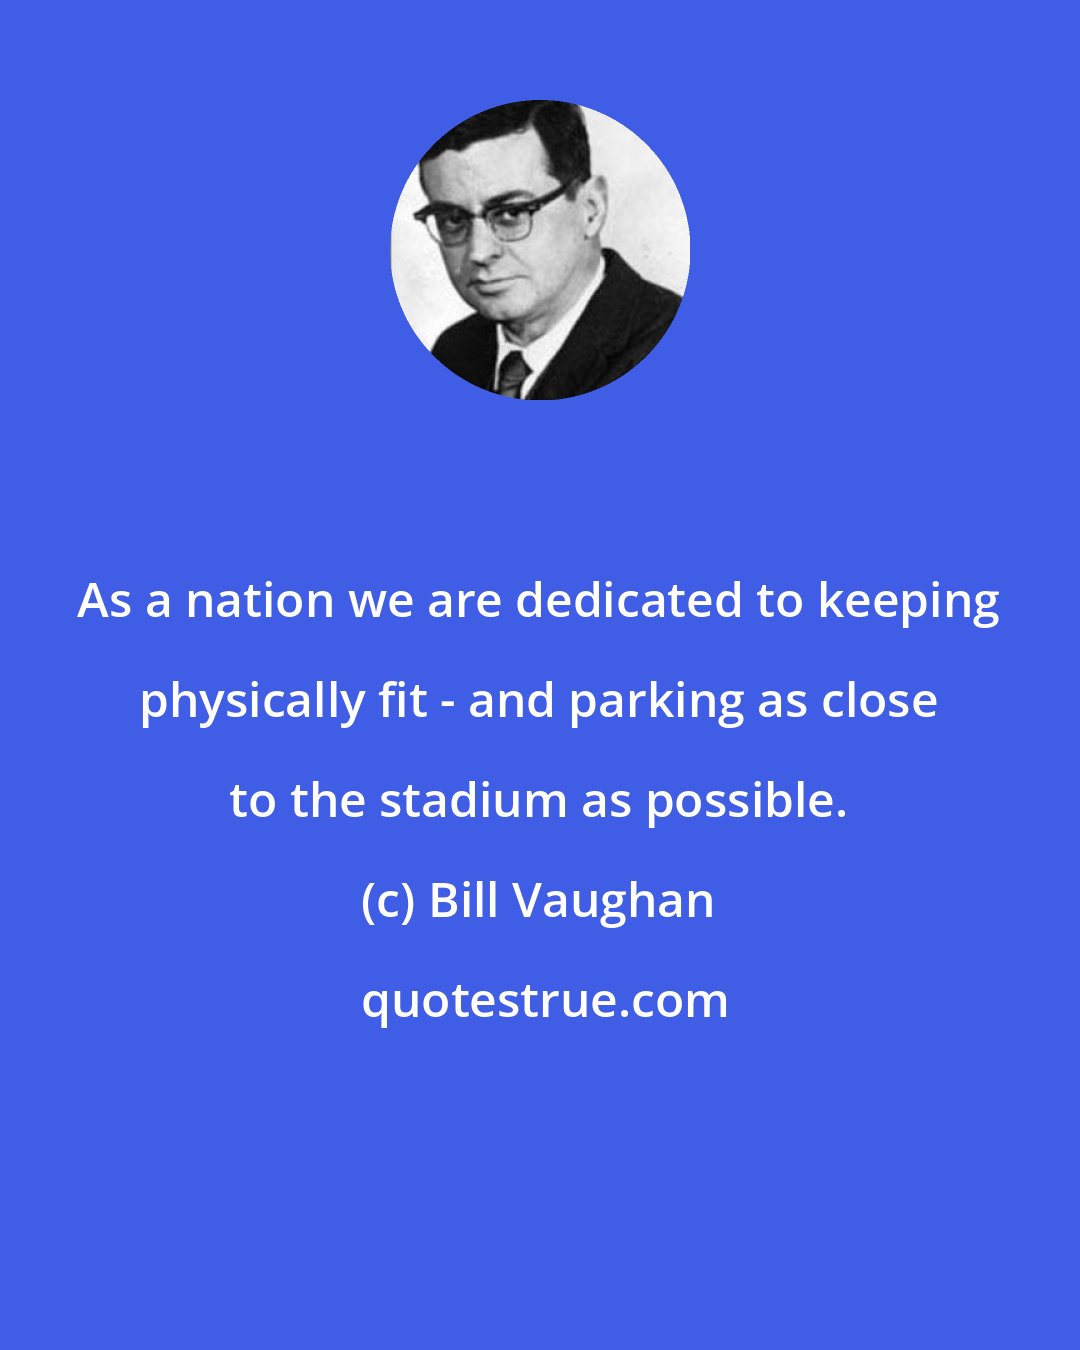 Bill Vaughan: As a nation we are dedicated to keeping physically fit - and parking as close to the stadium as possible.